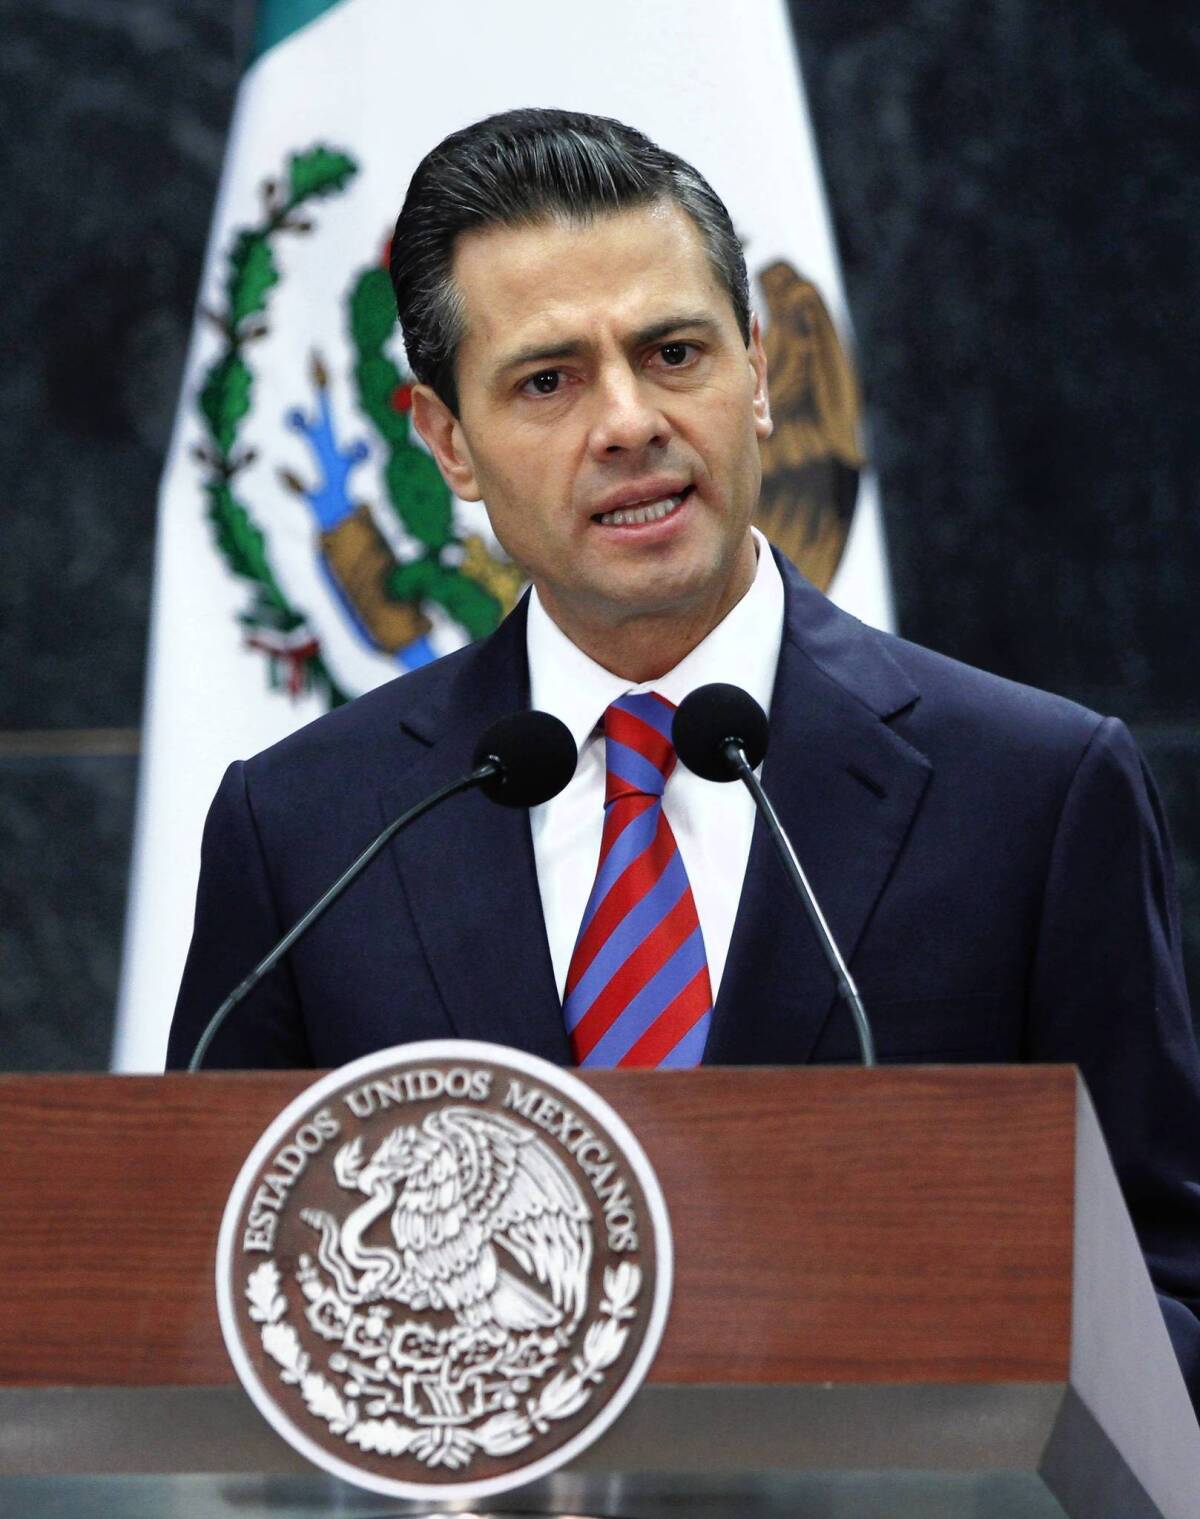 President Enrique Peña Nieto, pictured last week, is asking his fellow Mexicans to give his big-picture agenda time to generate results.